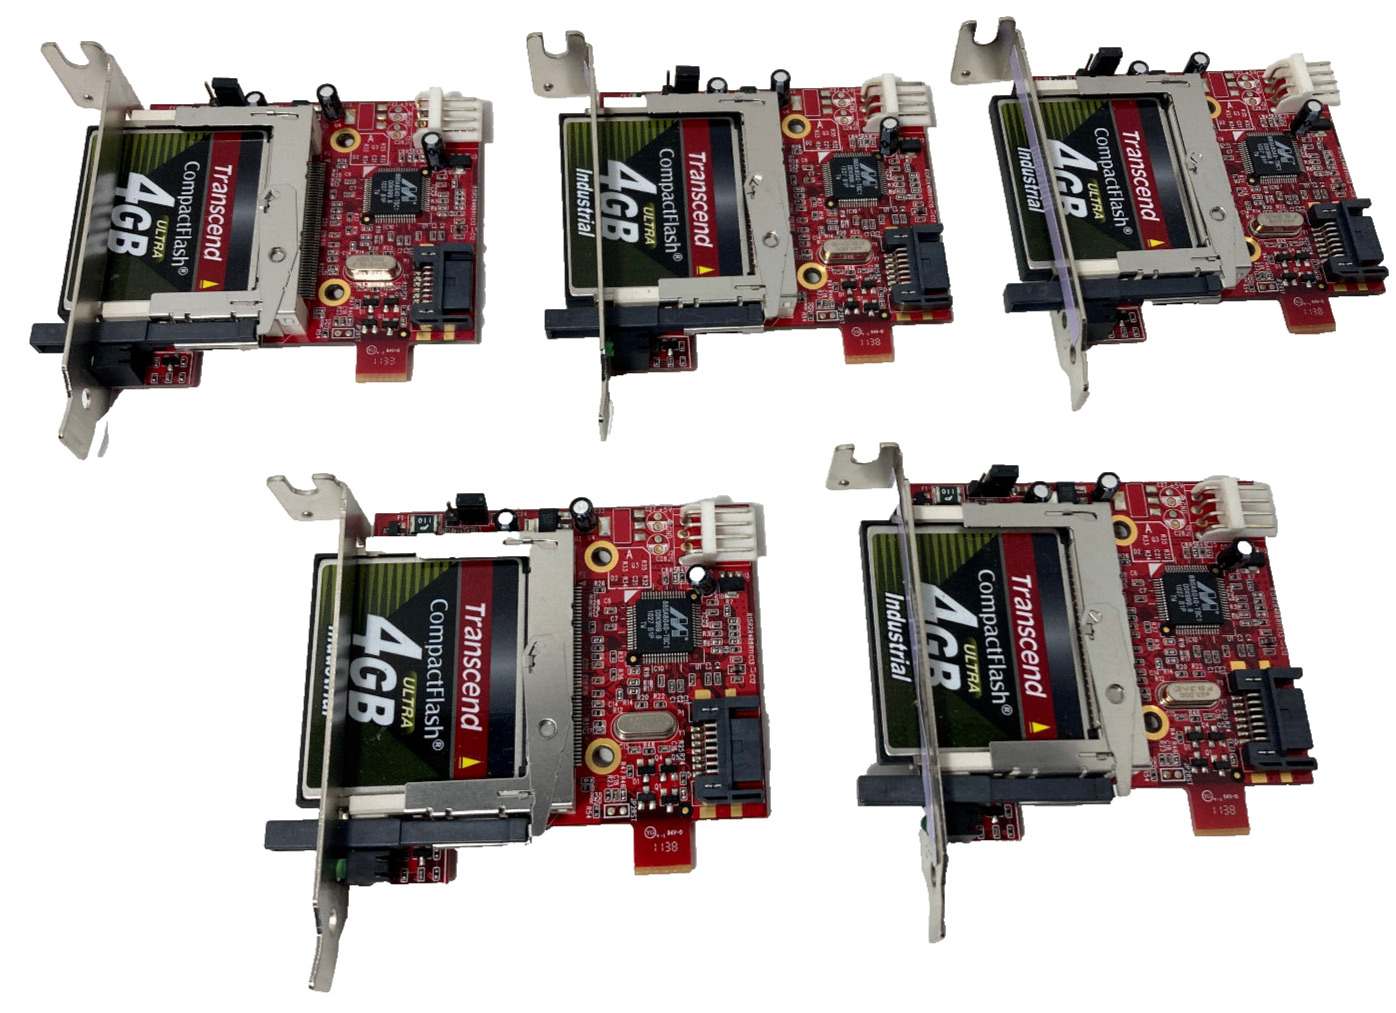 5 LOT Addonics Compact Flash Type I/II to Serial SATA Converter Adapter with 4GB